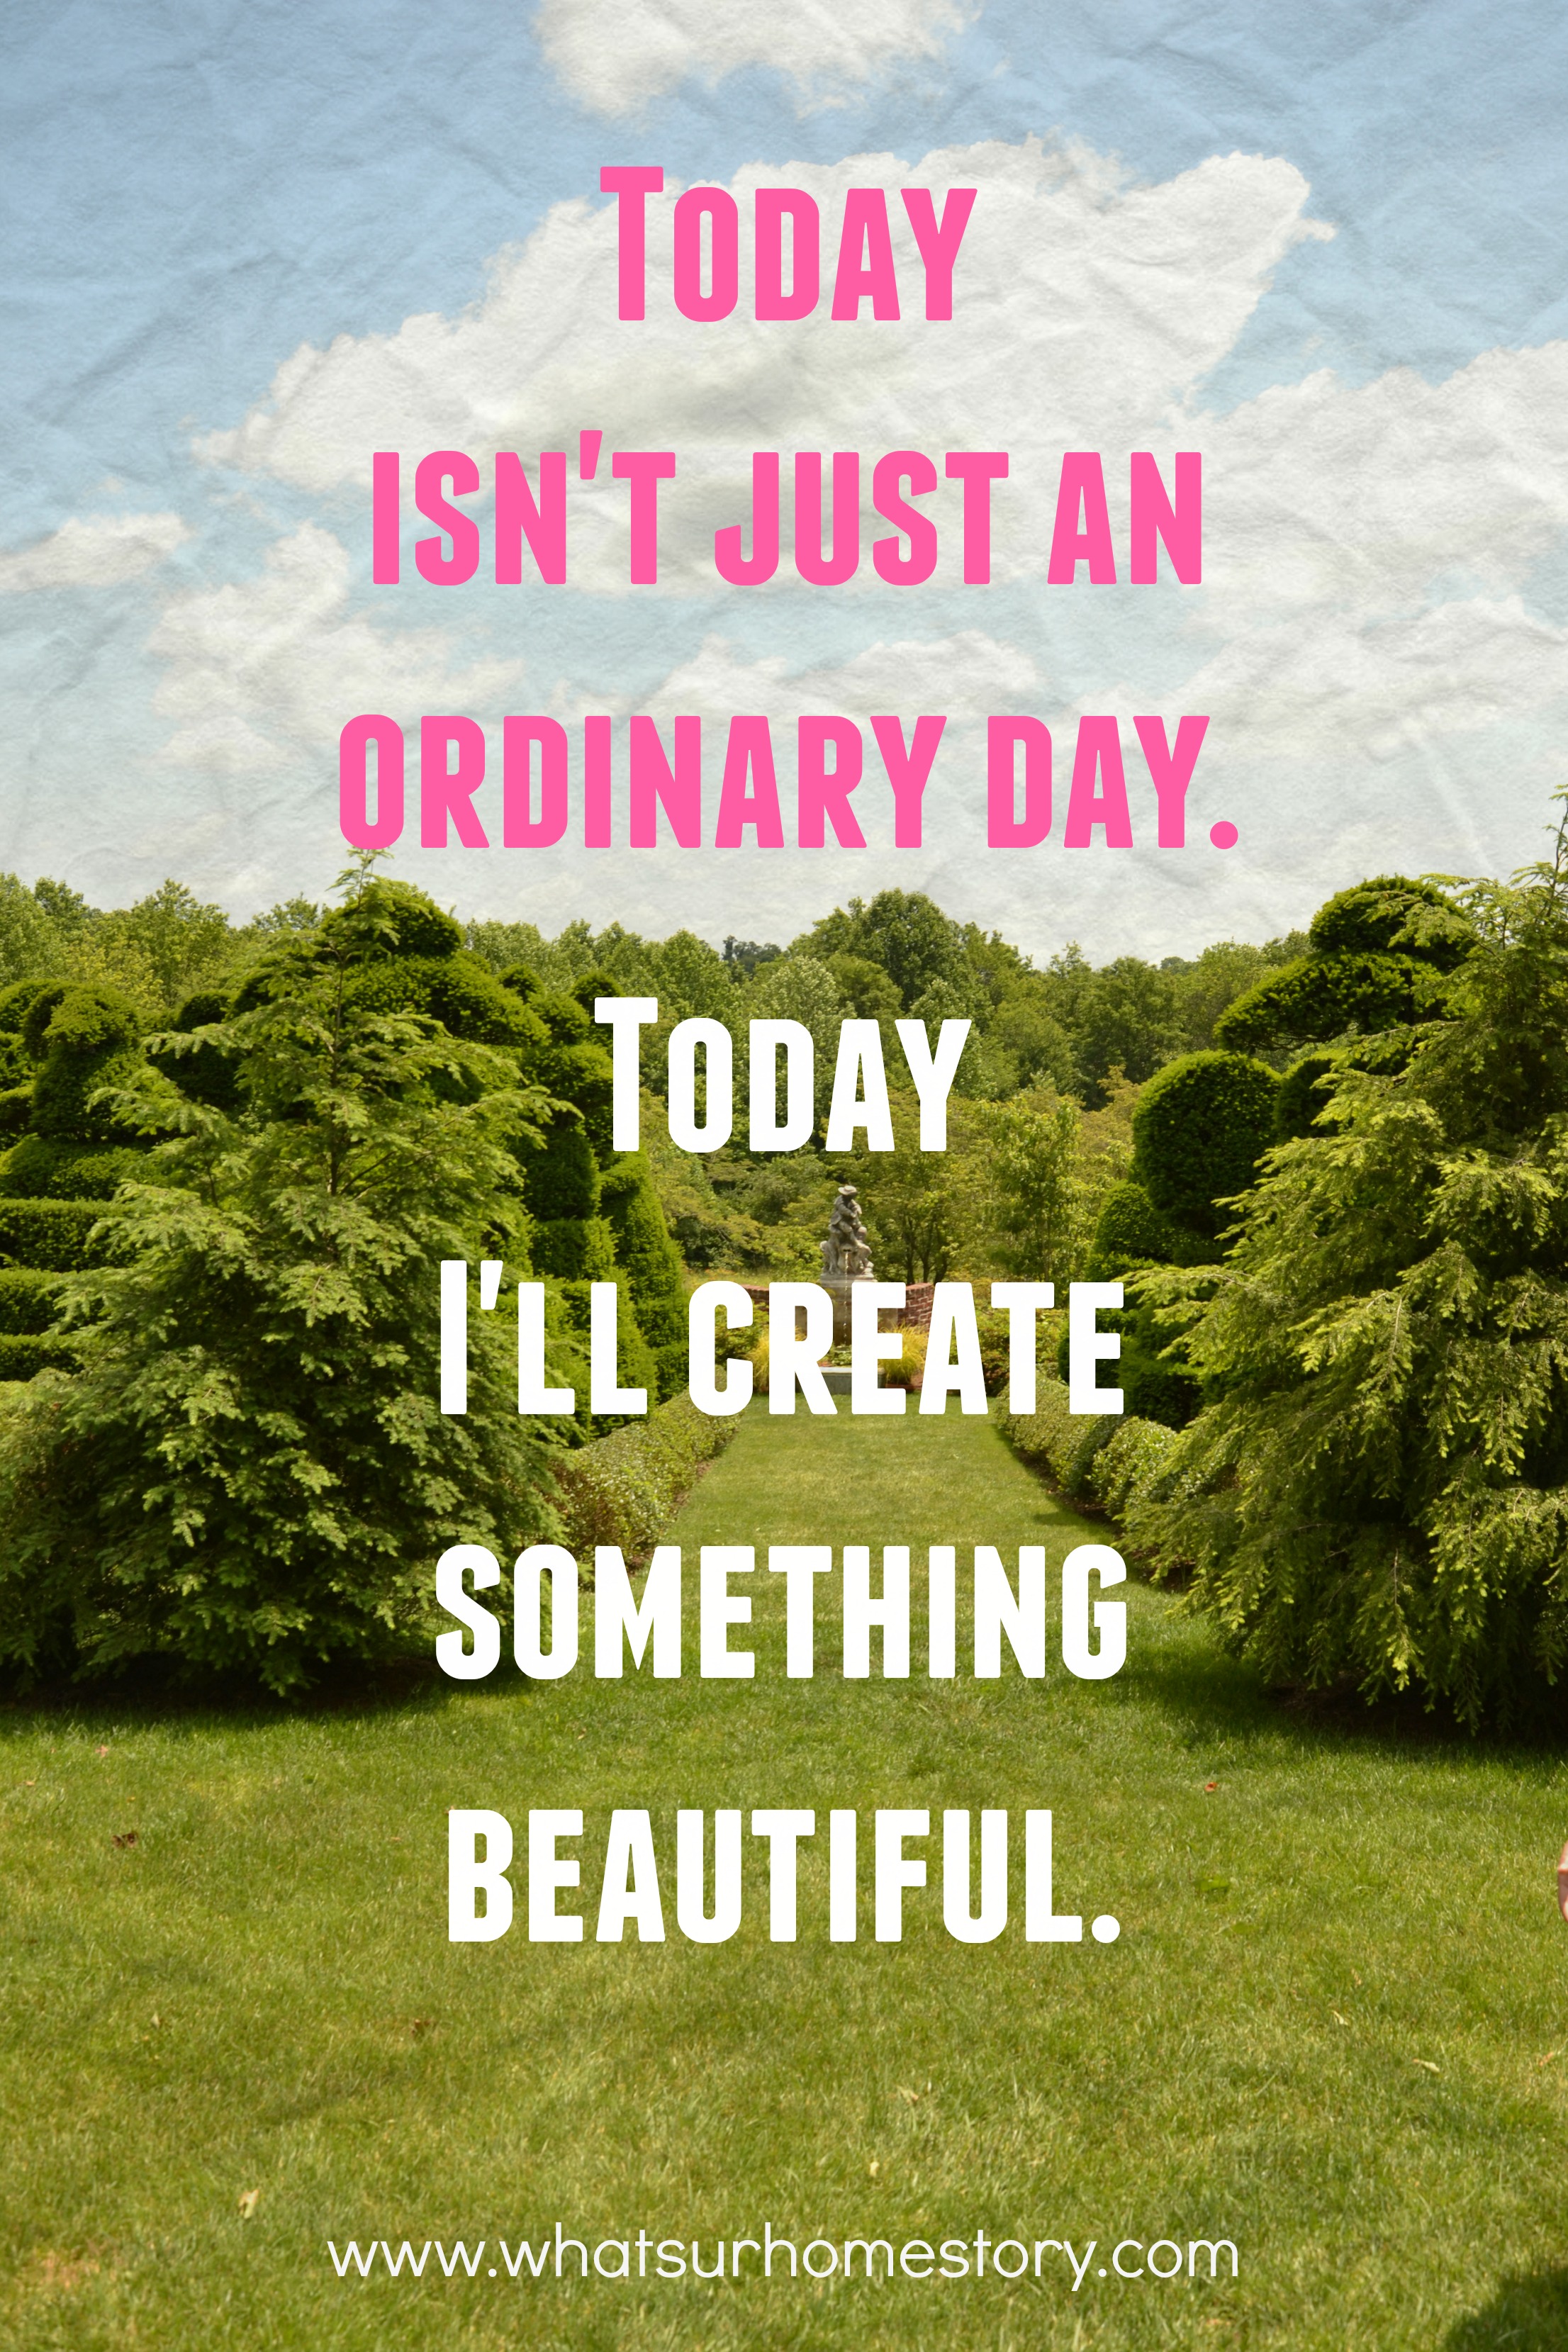 today isnt an ordinary day quote